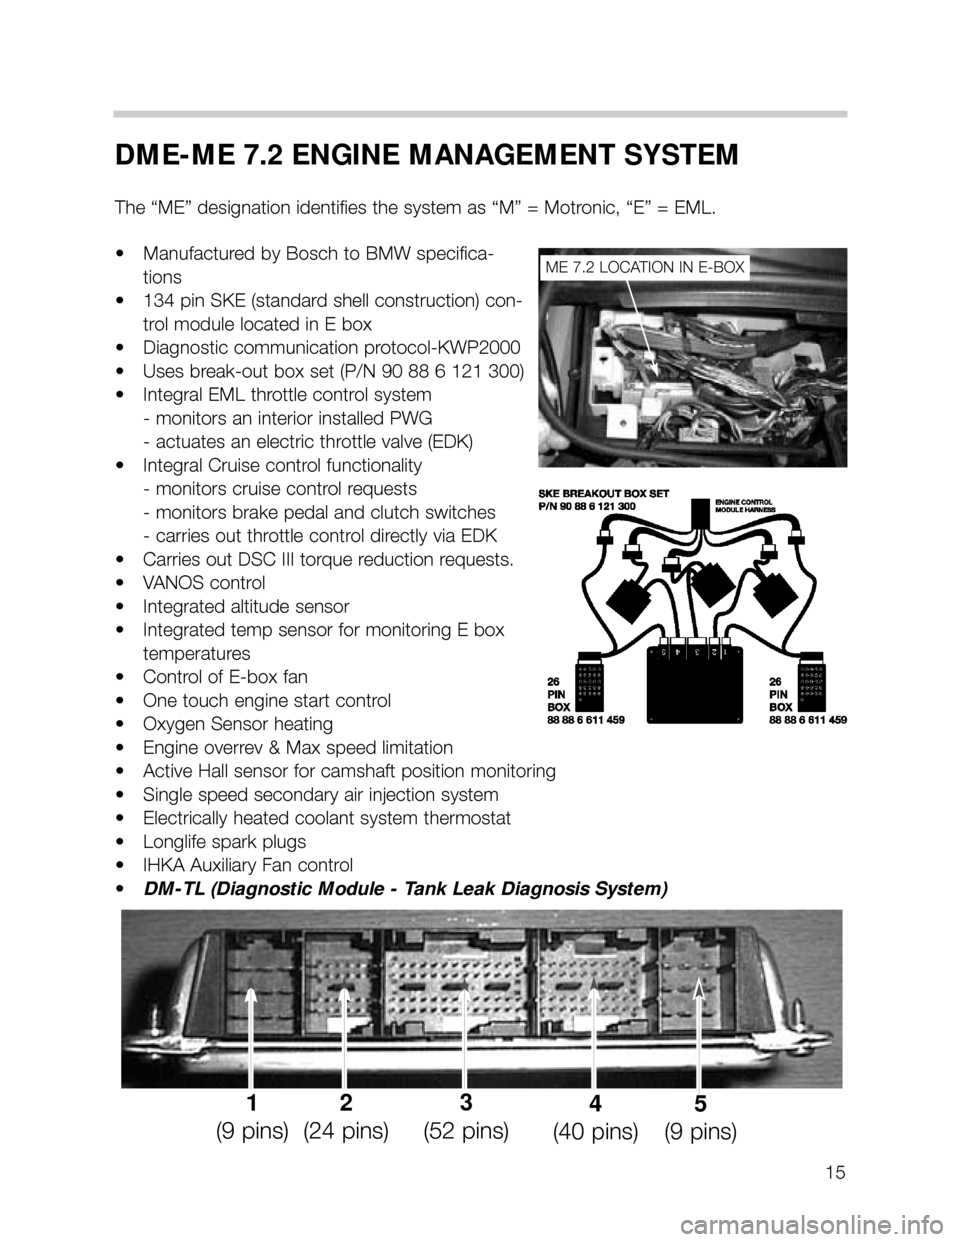 BMW 535i 2000 E39 M62TU Engine Workshop Manual 15
DME-ME 7.2 ENGINE MANAGEMENT SYSTEM
The “ME” designation identifies the system as “M” = Motronic, “E” = EML.
• Manufactured by Bosch to BMW specifica-
tions
• 134 pin SKE (standard 